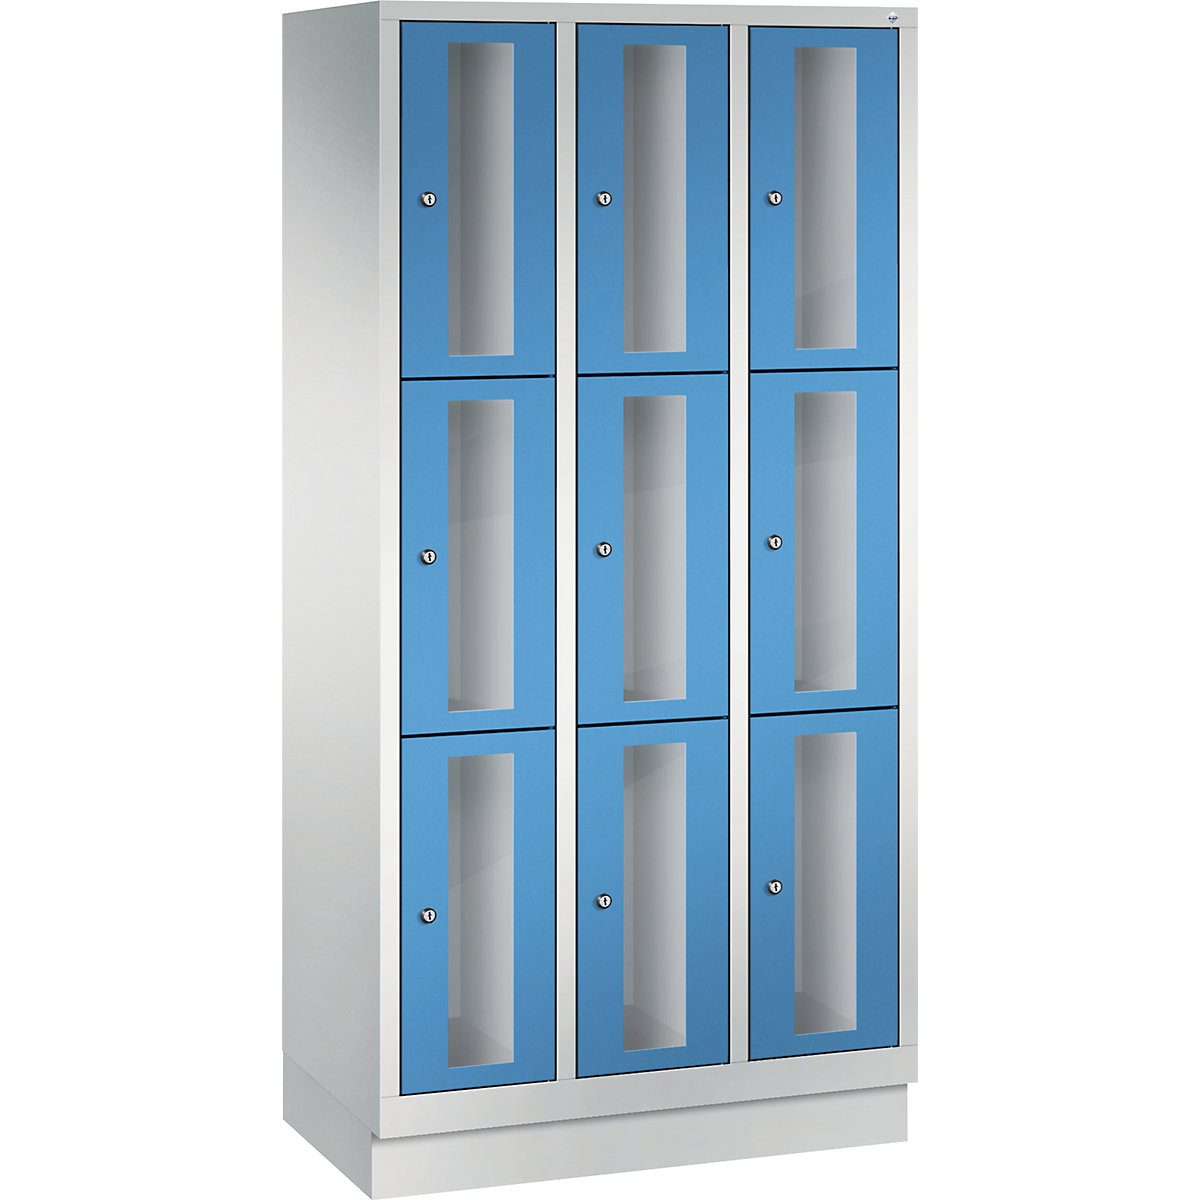 C+P – CLASSIC locker unit, compartment height 510 mm, with plinth, 9 compartments, width 900 mm, light blue door